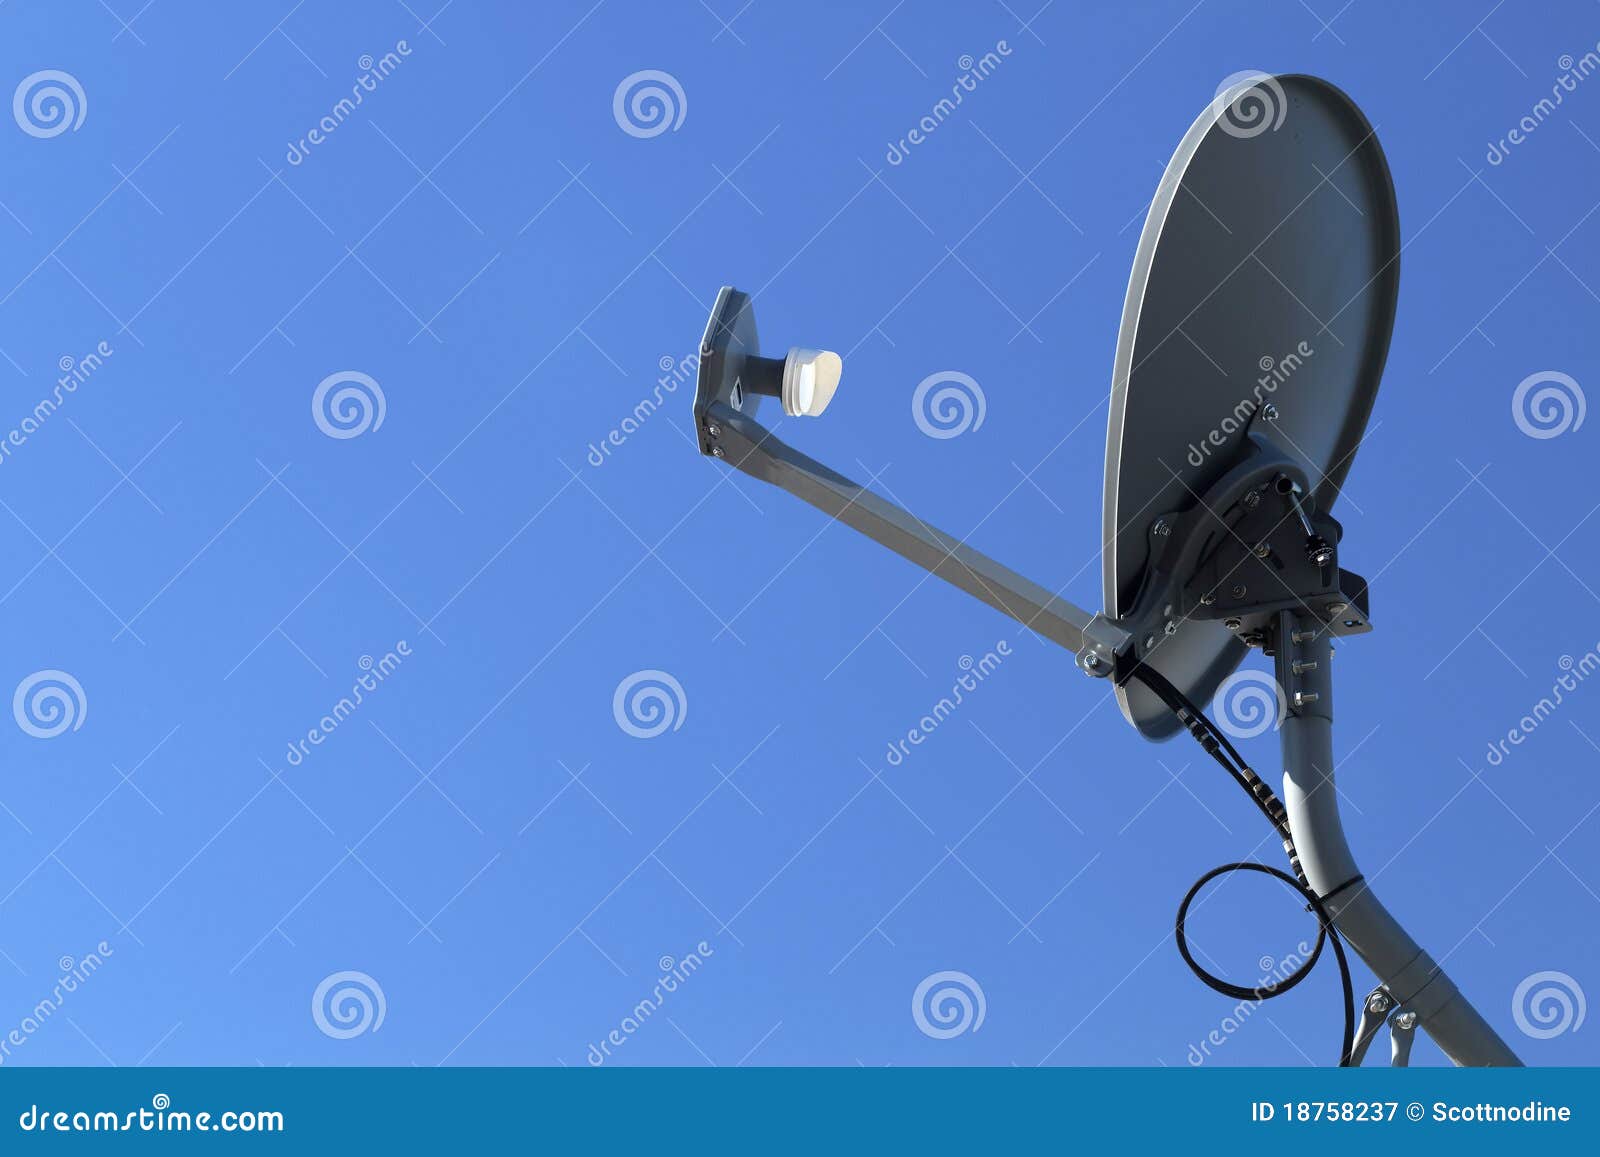 modern hd satellite dish on a clear blue sky day